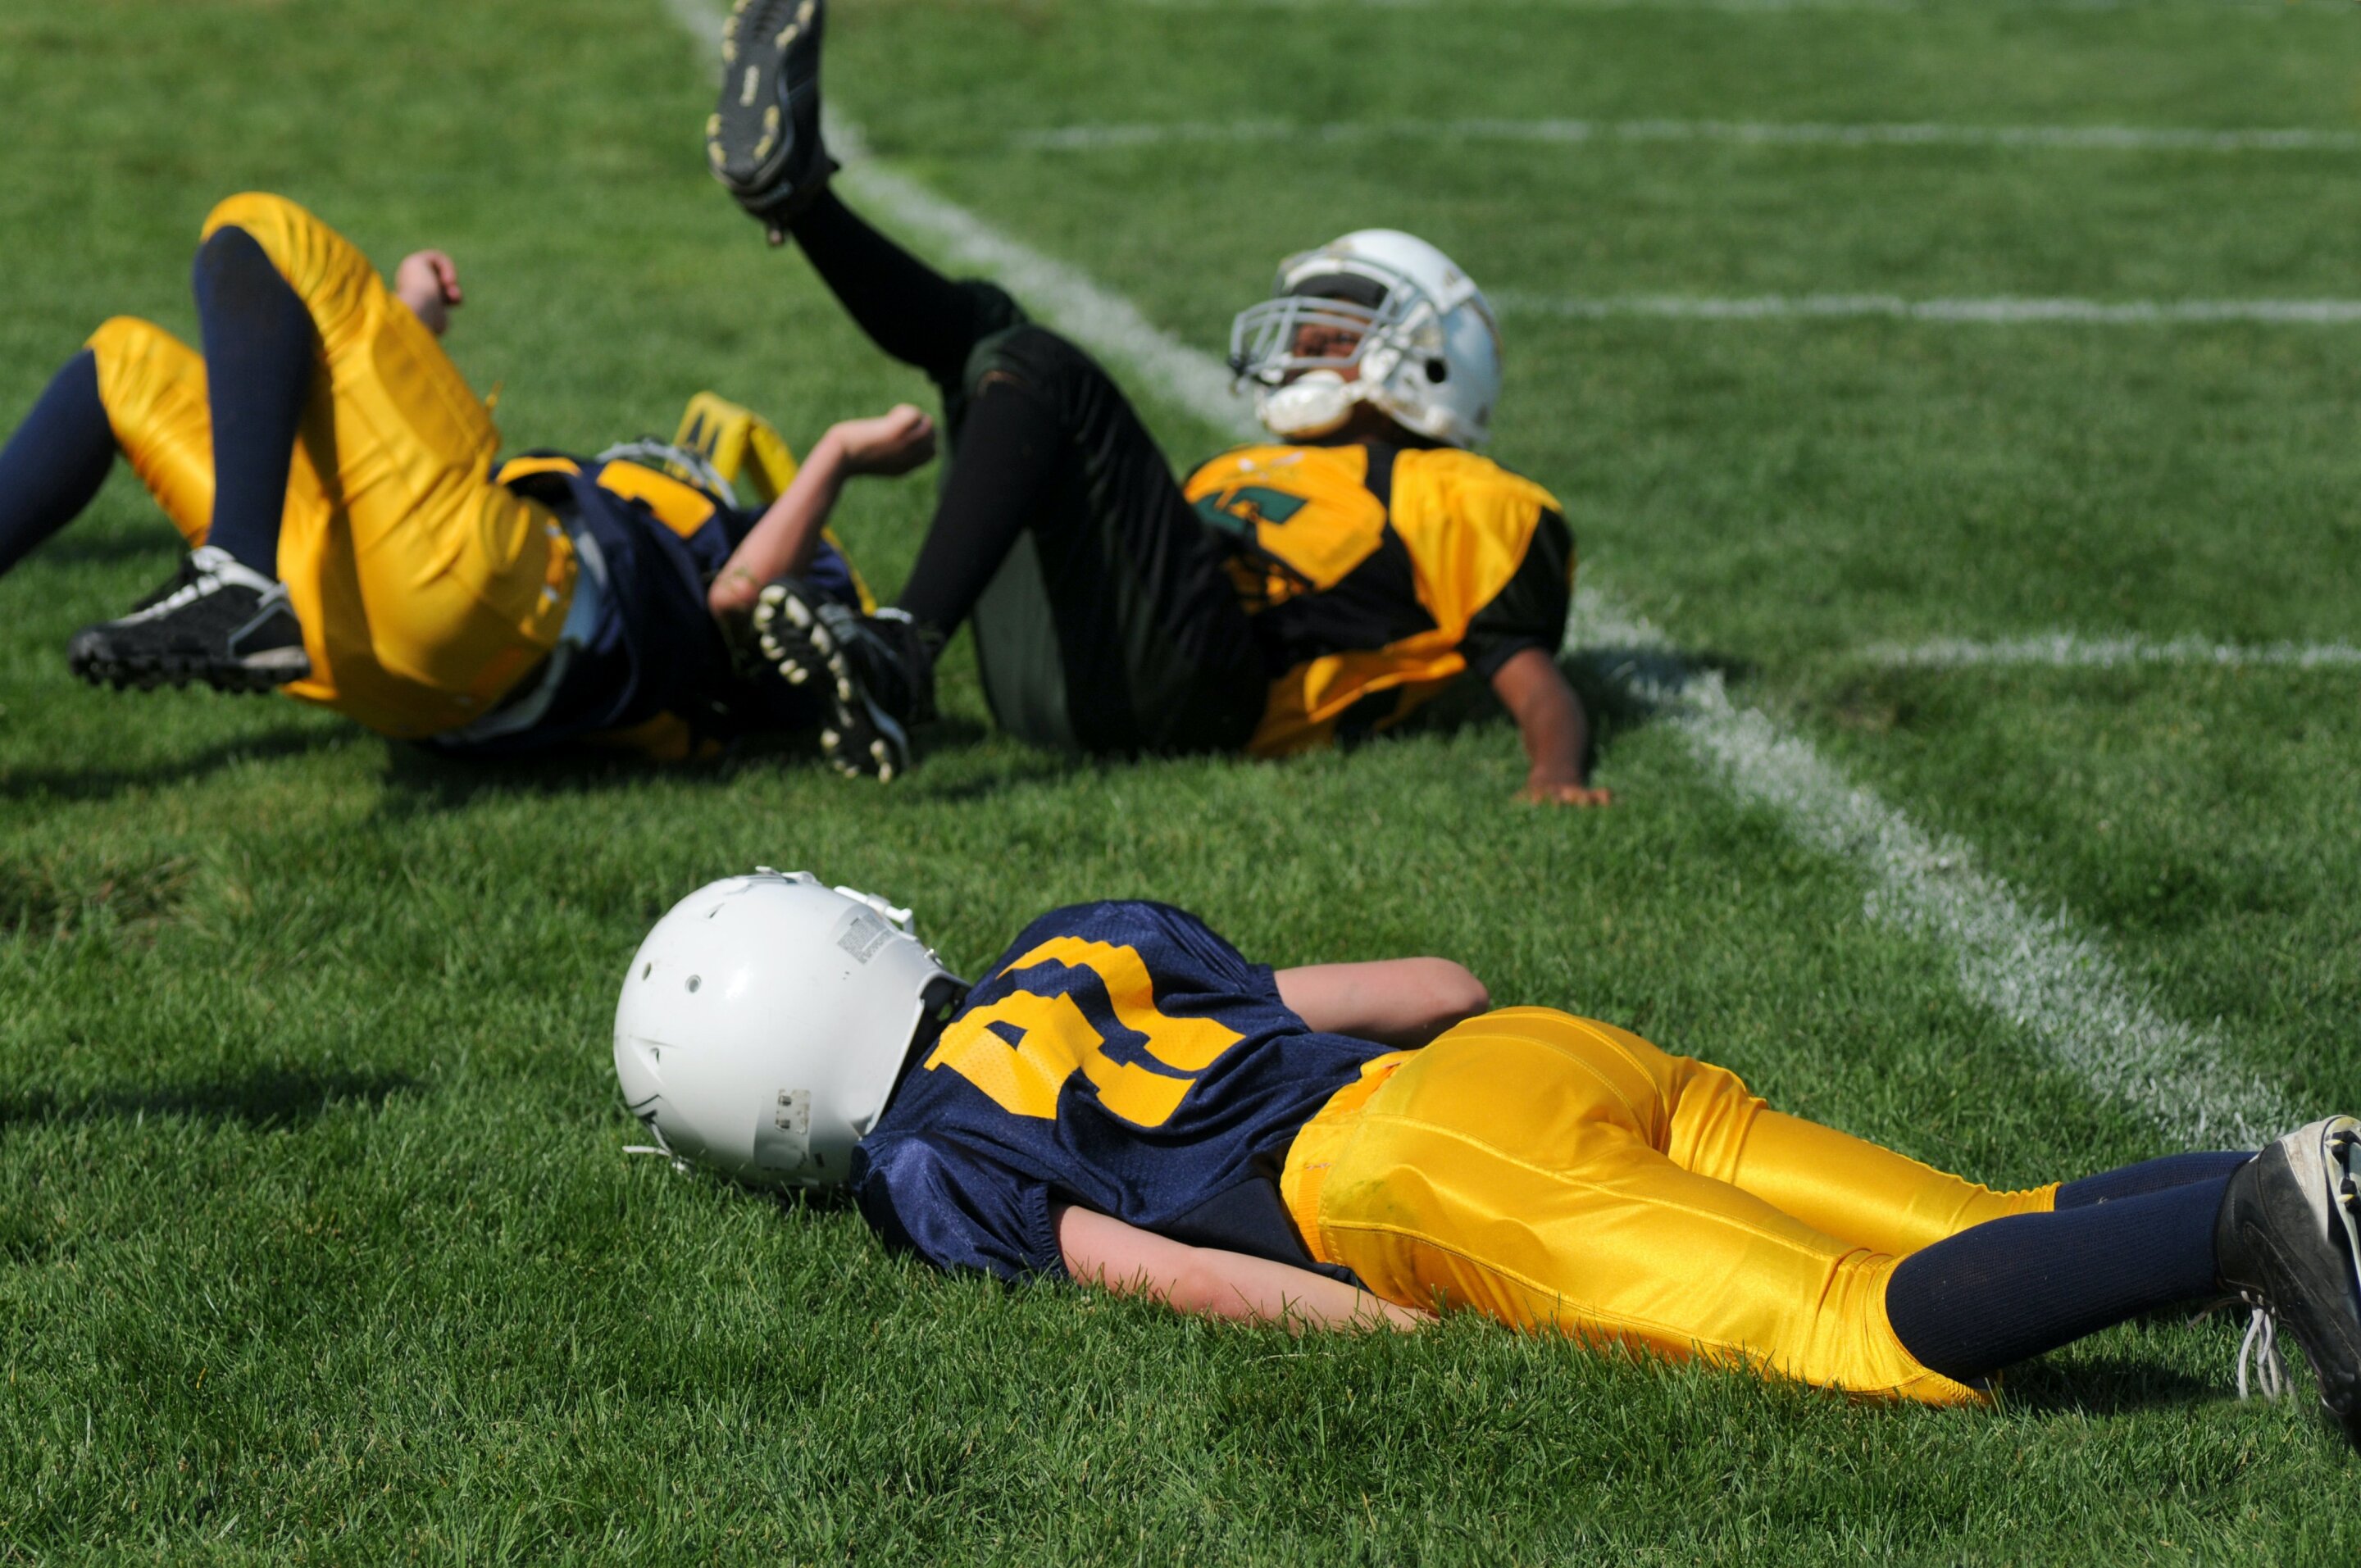 #New study finds that the gut can hold important clues about concussions